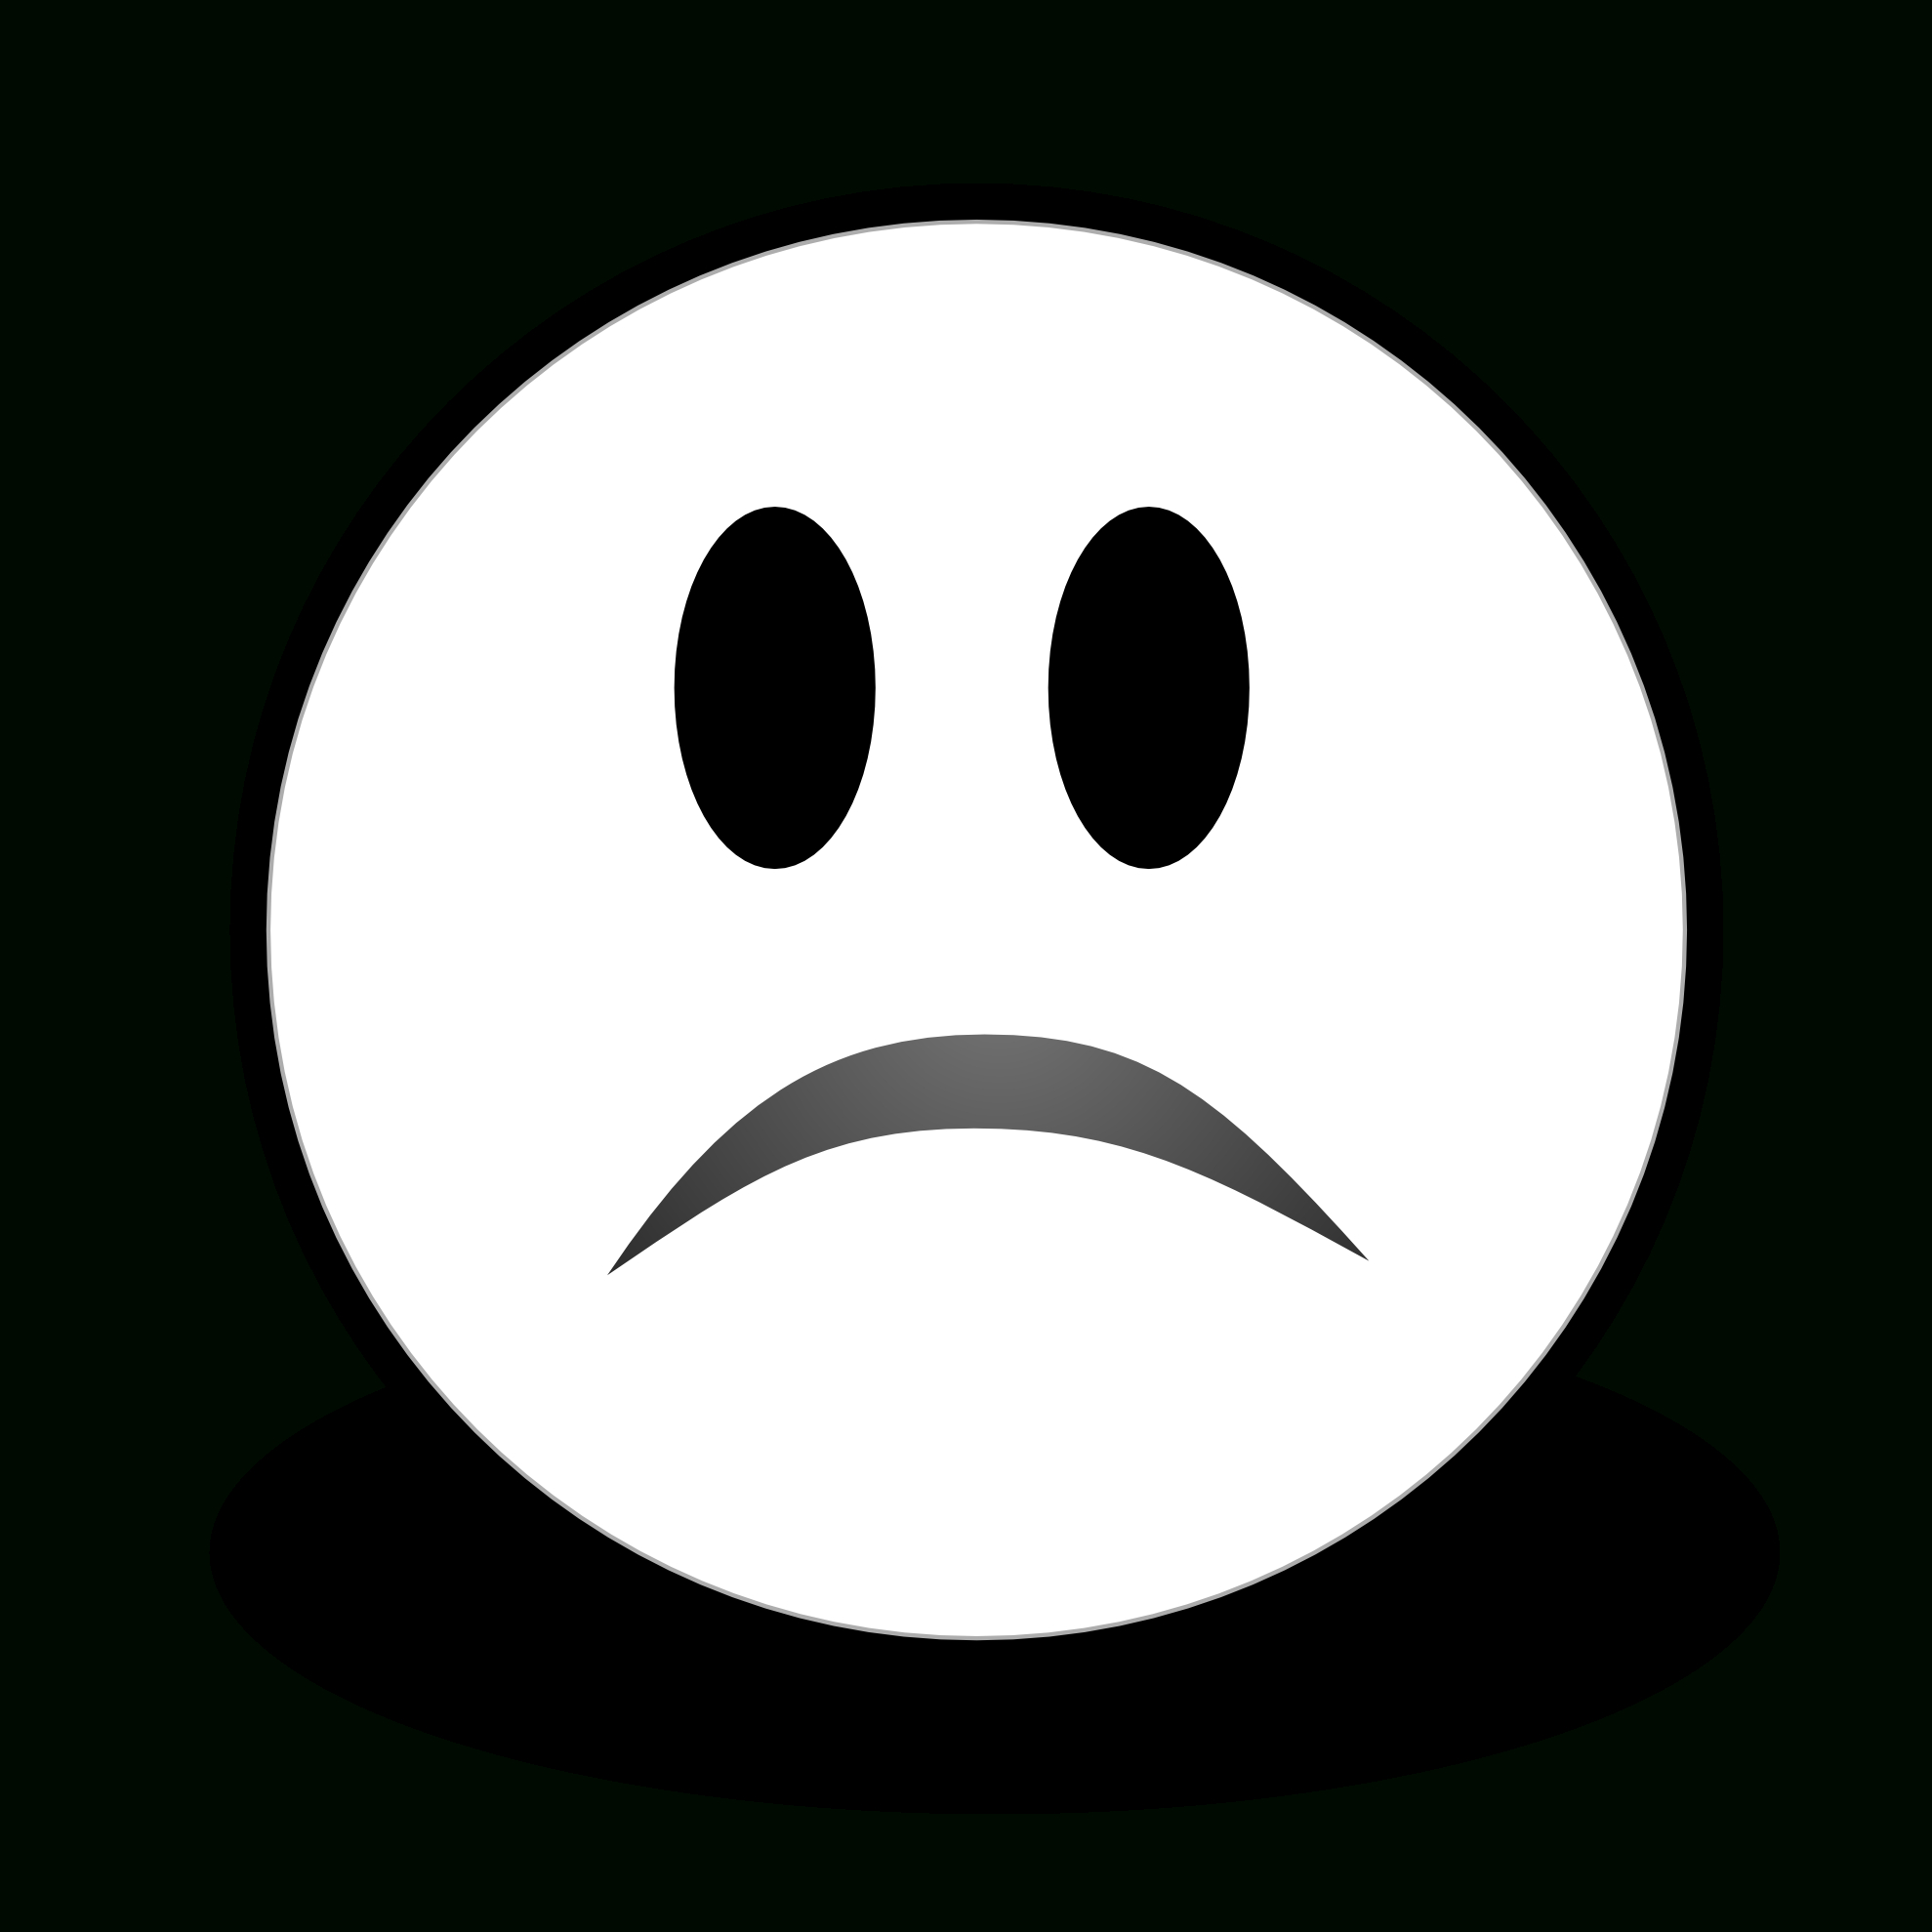 Free Sad Face Pictures Free, Download Free Clip Art, Free Clip Art - Free Printable Sad Faces